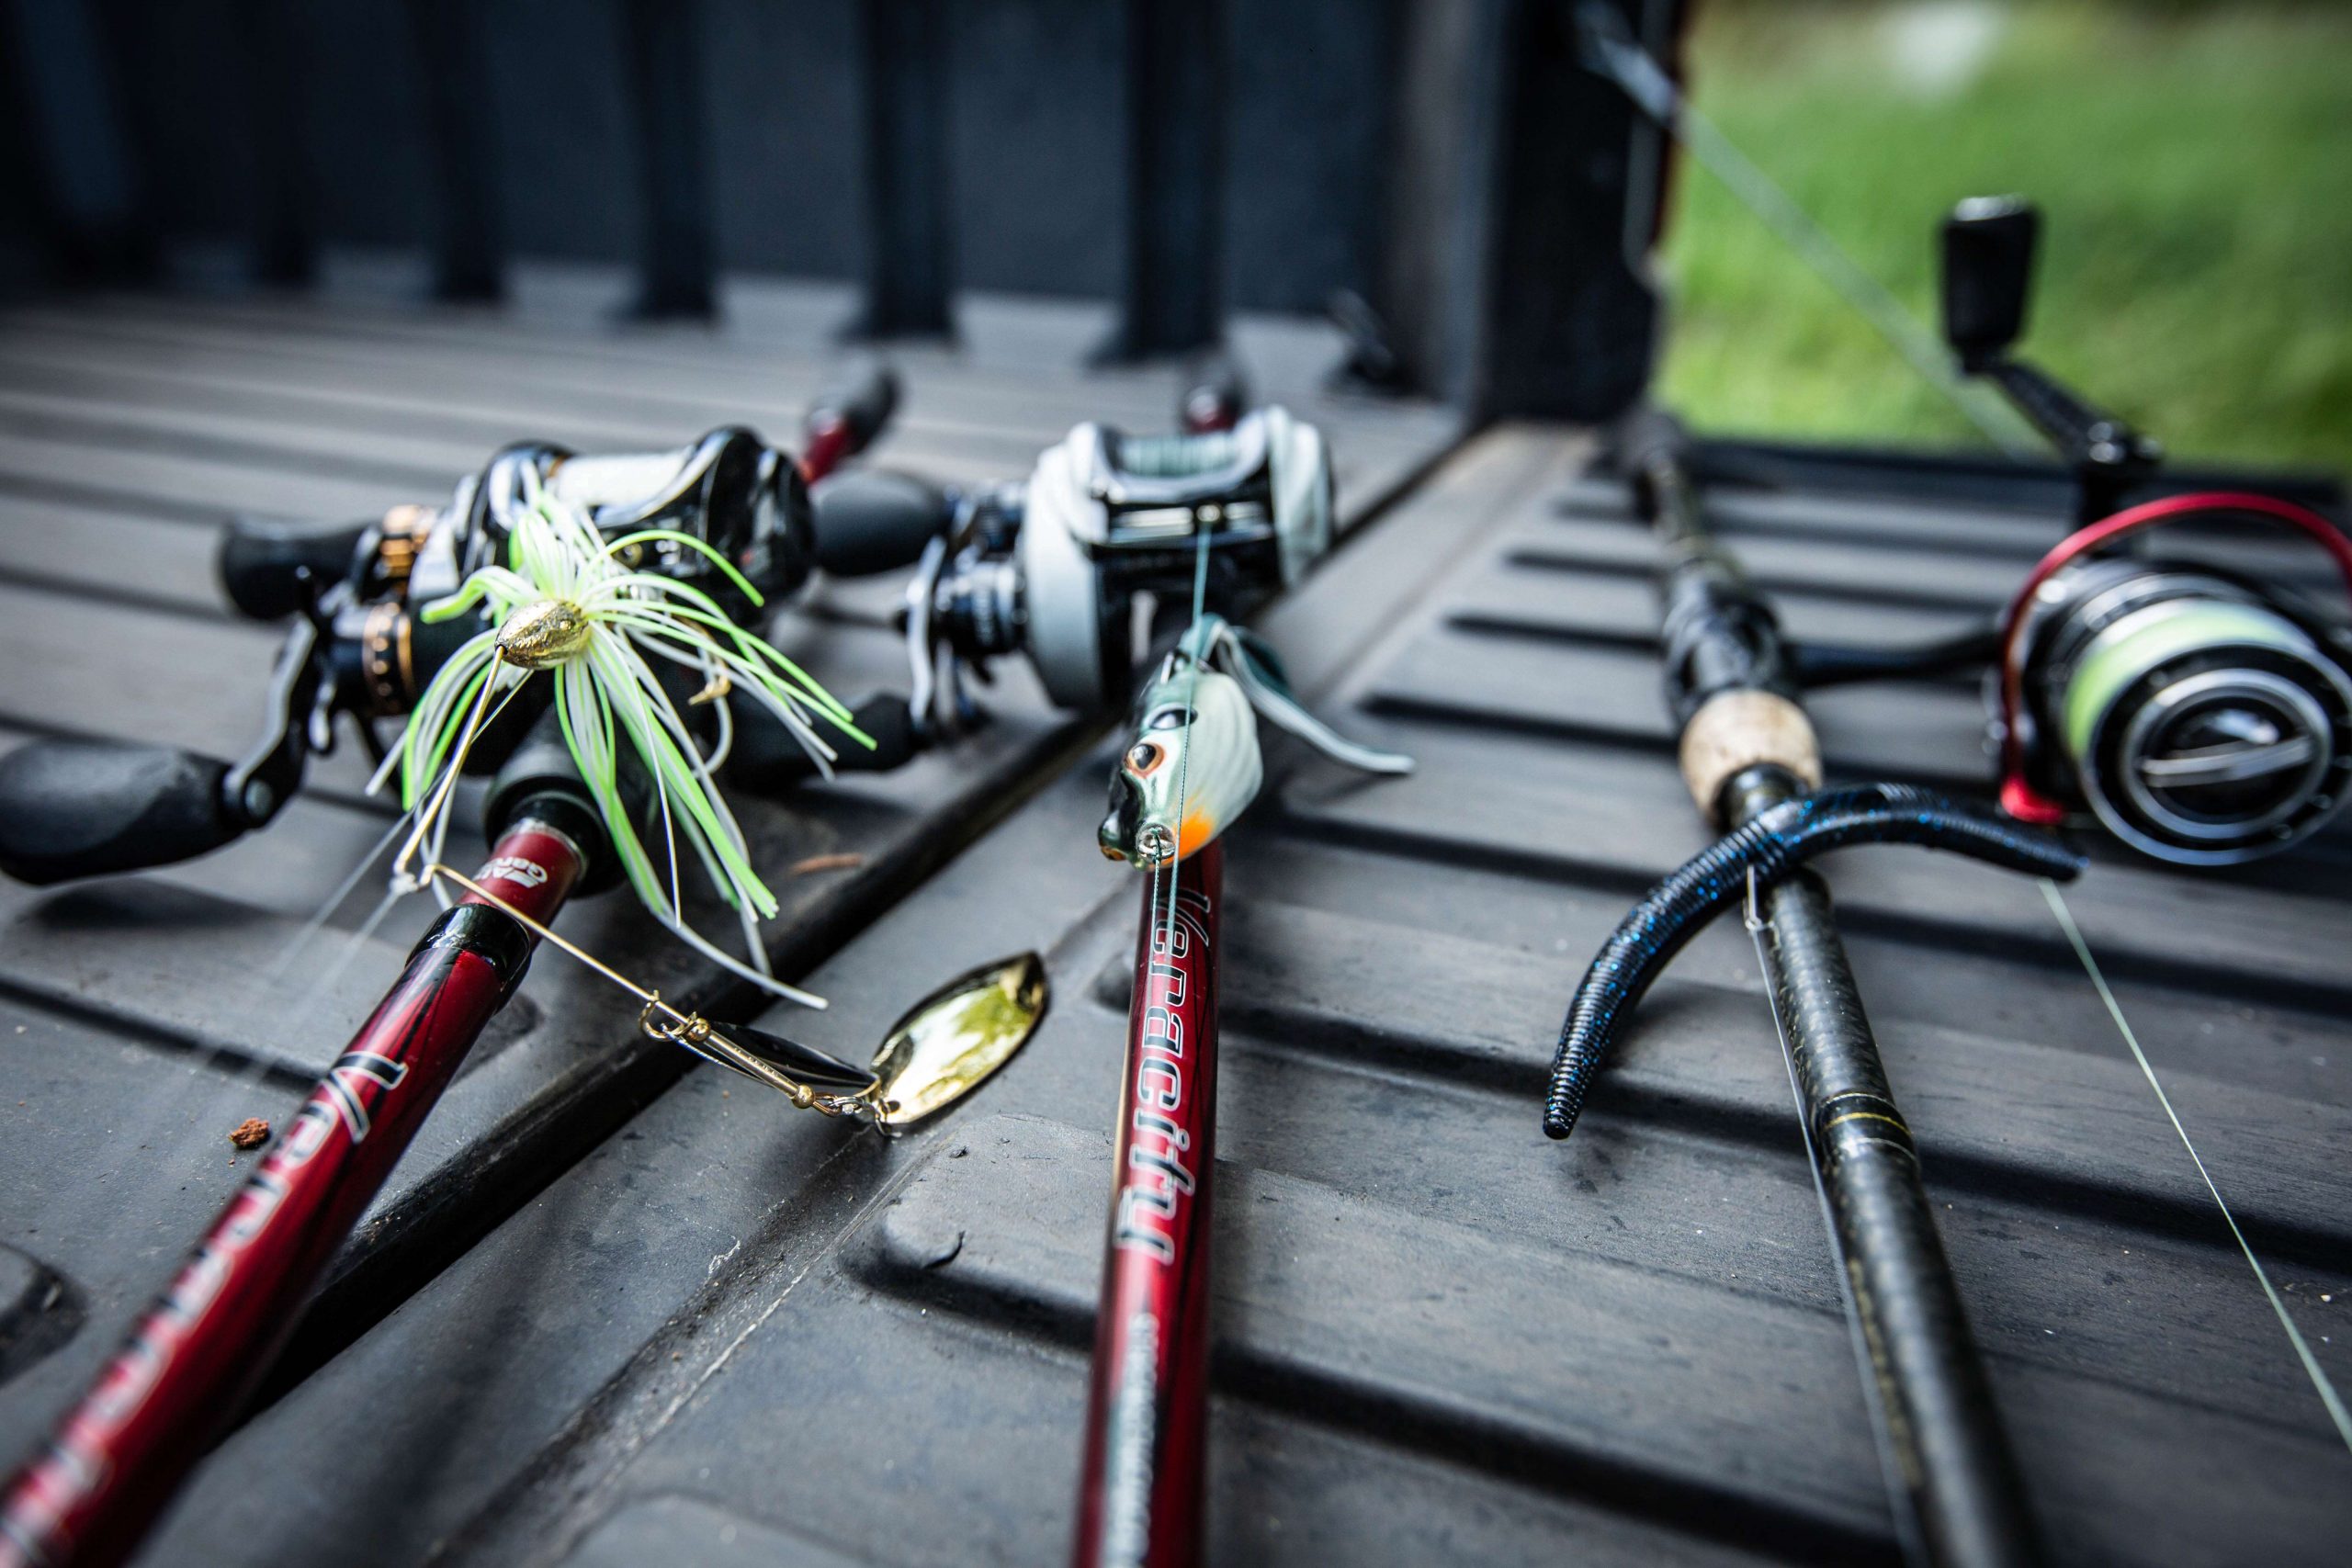 Three Abu Garcia rigs loaded with his Top 3 favorite pond baits. 